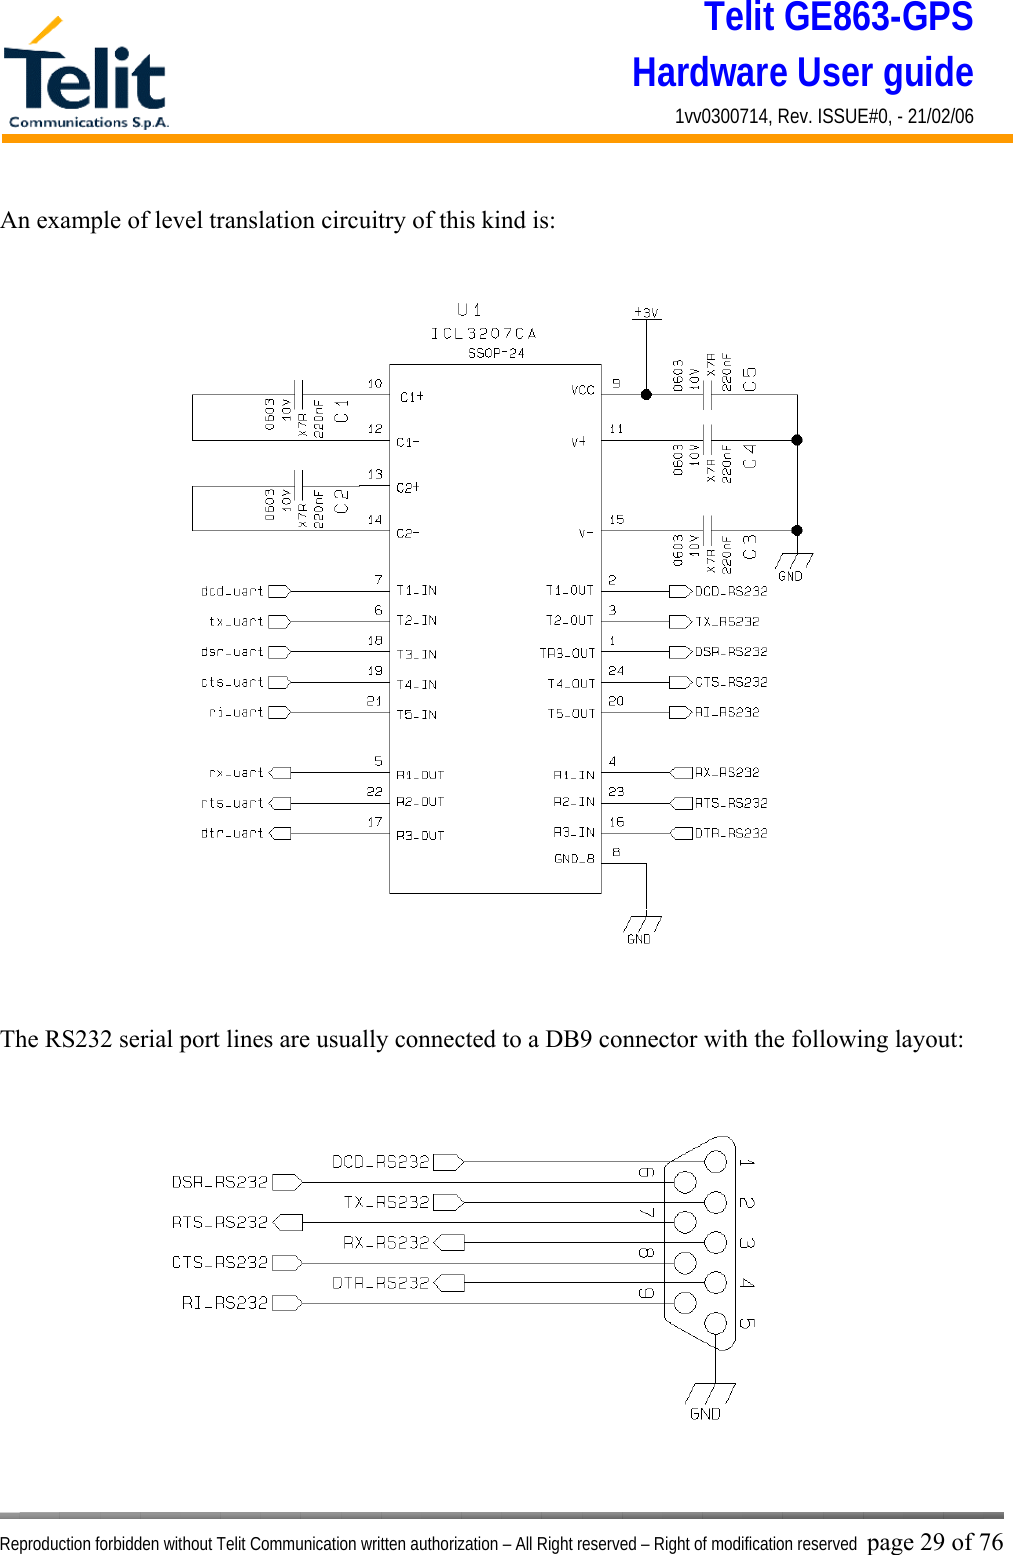 Telit GE863-GPS Hardware User guide 1vv0300714, Rev. ISSUE#0, - 21/02/06    Reproduction forbidden without Telit Communication written authorization – All Right reserved – Right of modification reserved page 29 of 76 An example of level translation circuitry of this kind is:    The RS232 serial port lines are usually connected to a DB9 connector with the following layout: 